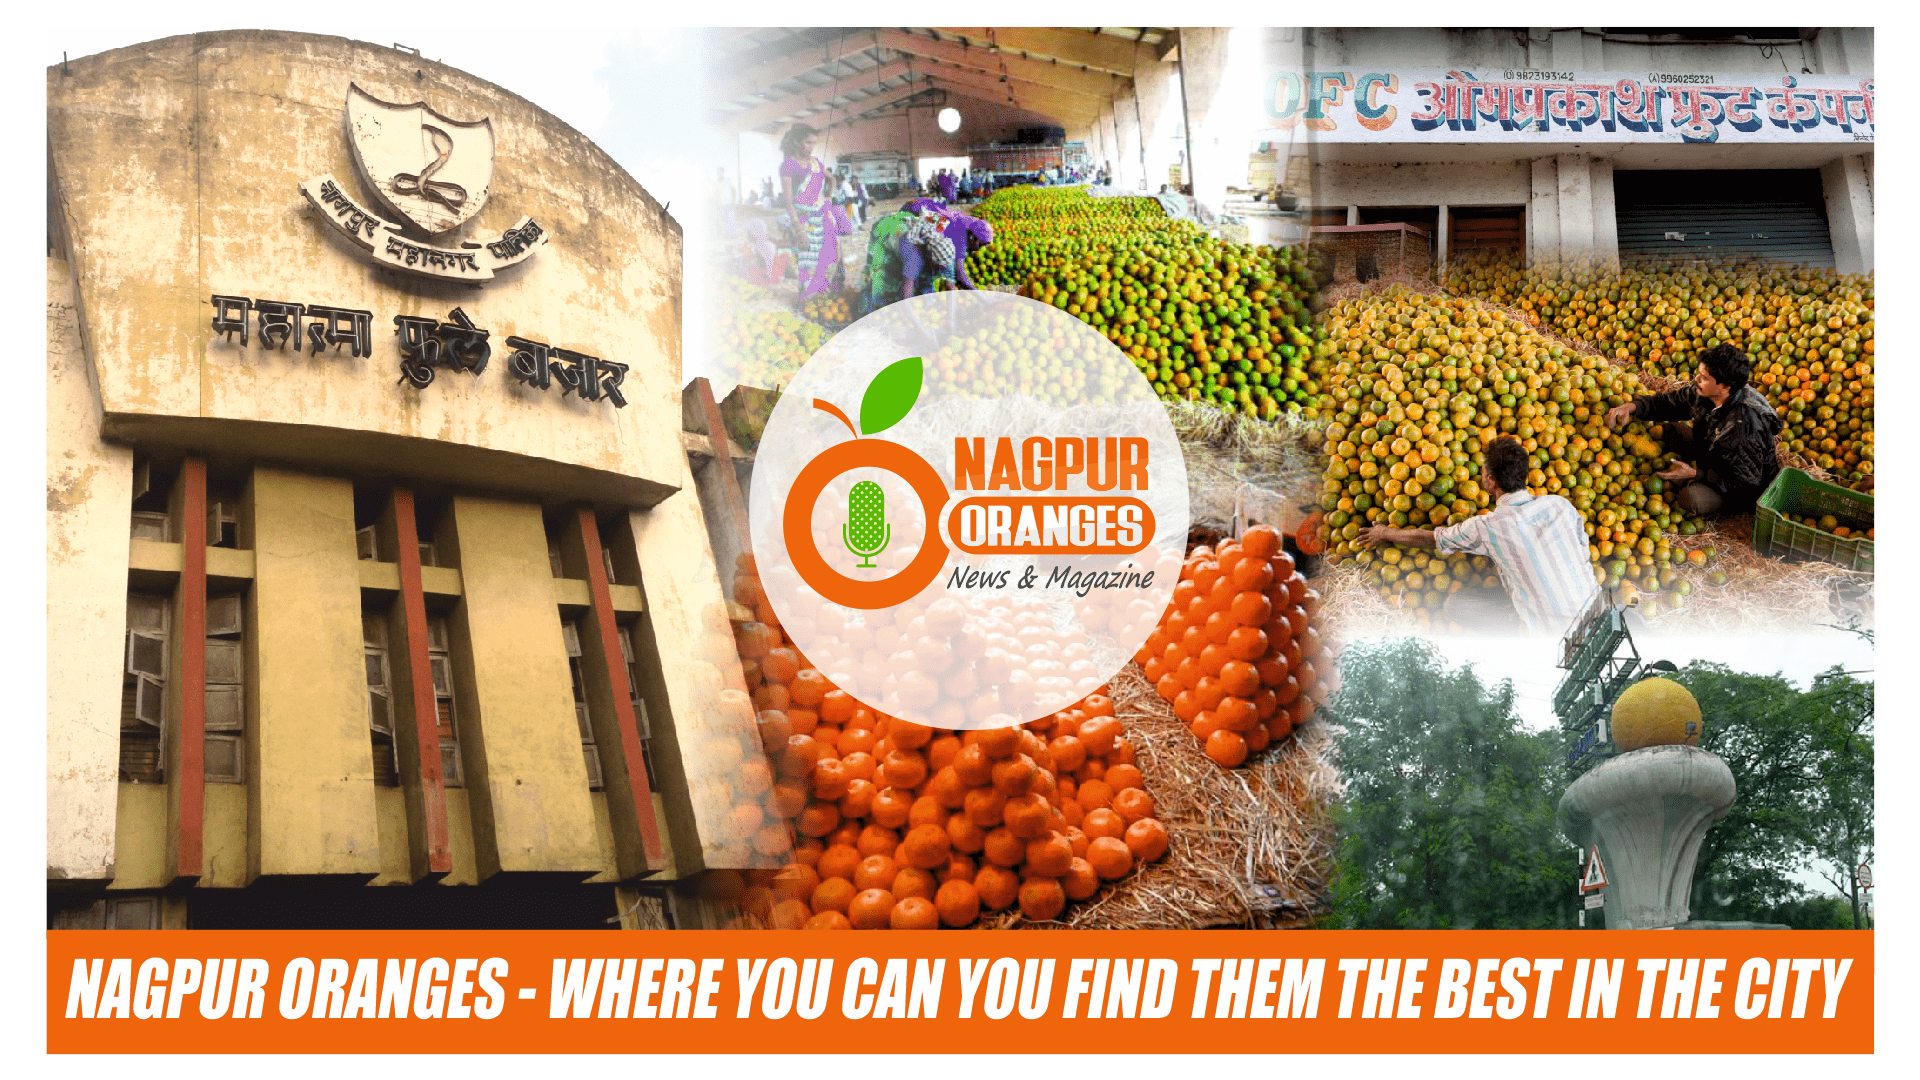 Nagpur Oranges - Where You Can You Find them the Best in the City